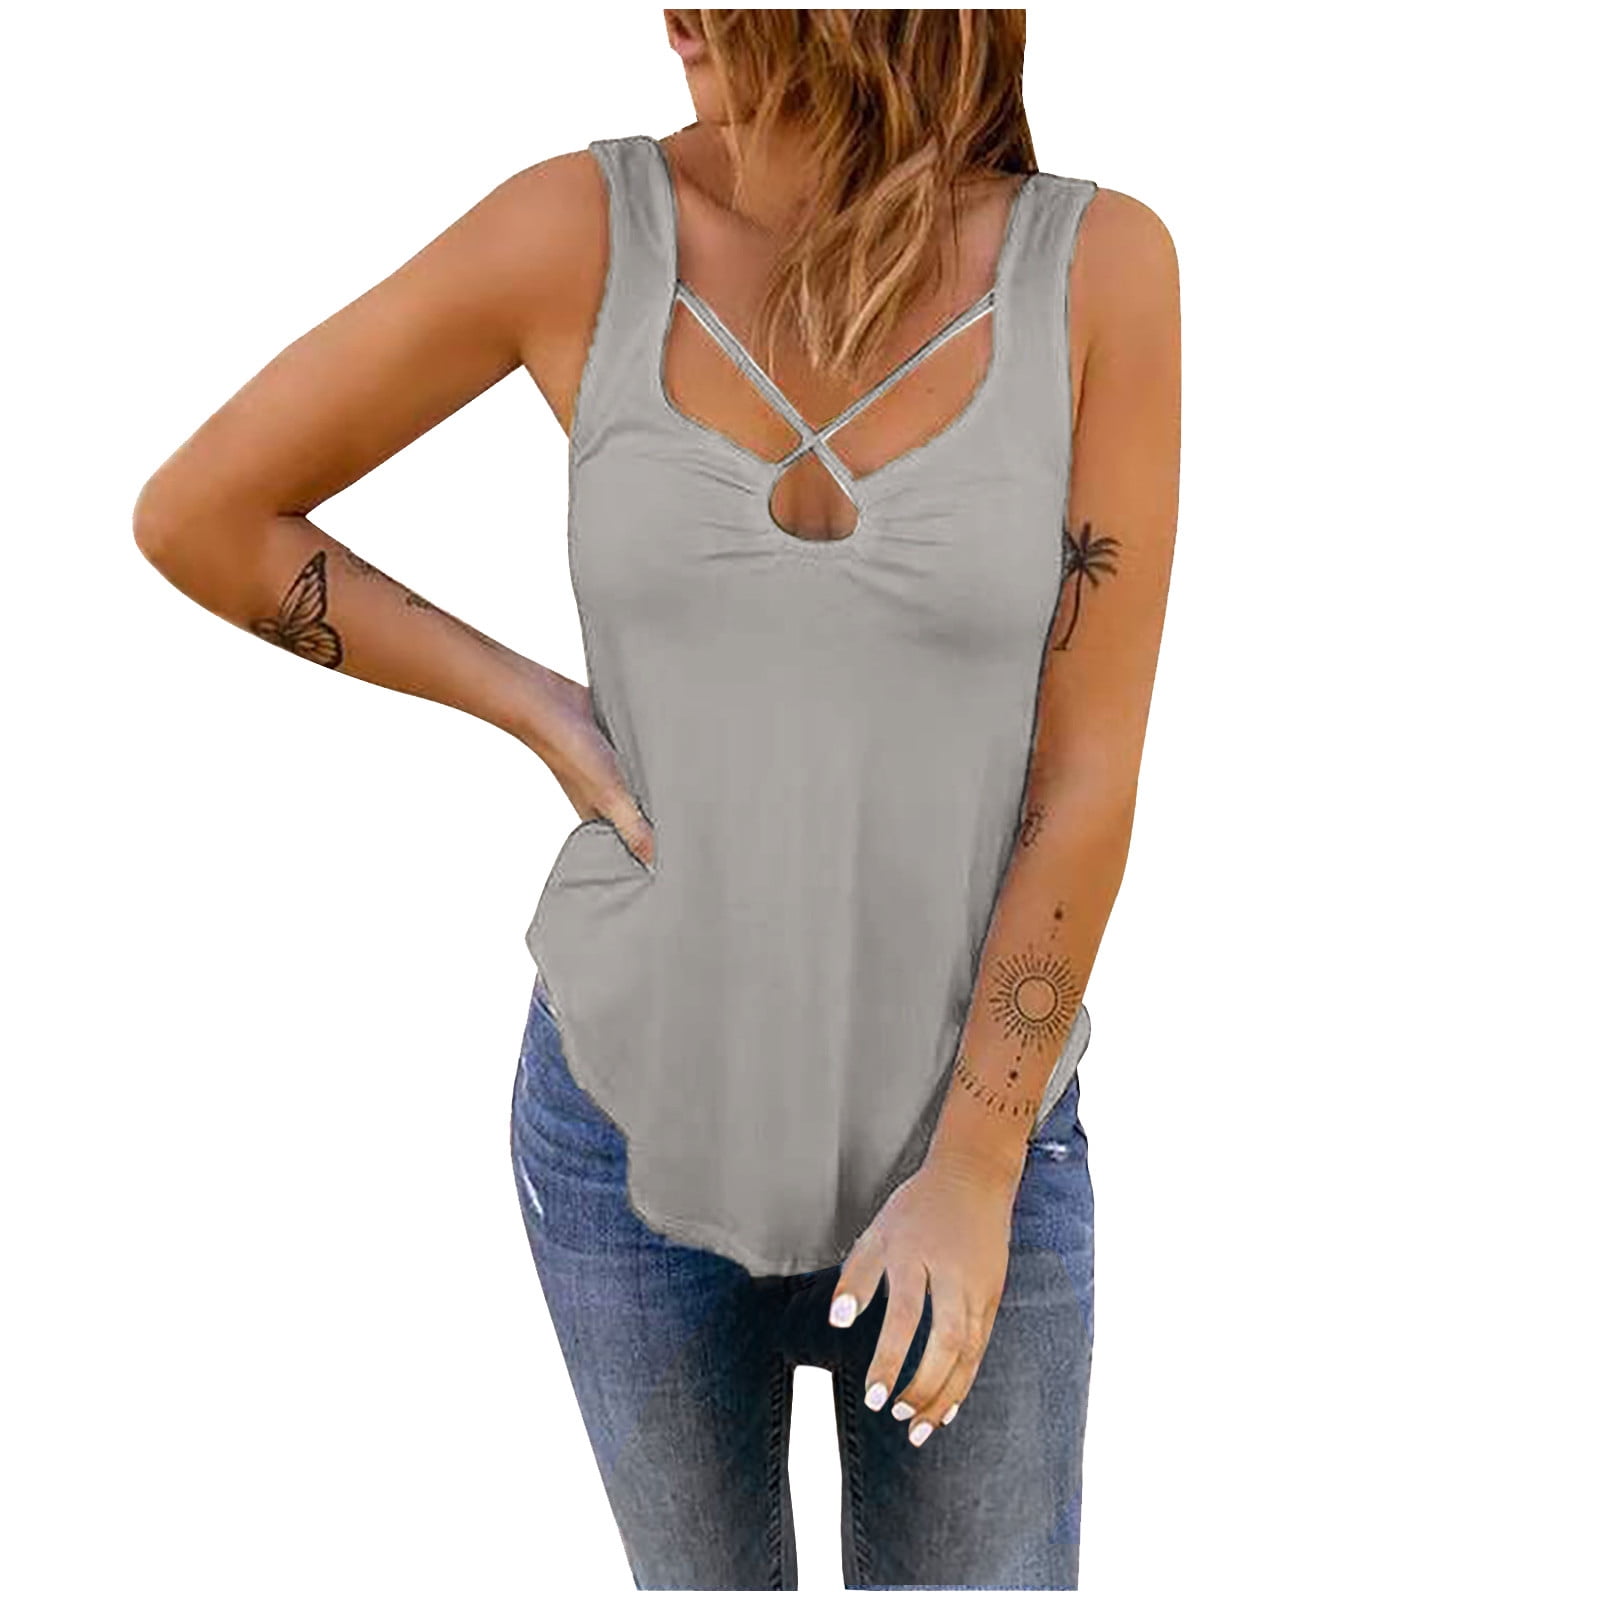 Jsezml Push up Tank Tops for Women Casual Sleeveless Hide Belly Shirts  Flowy Summer Blouses to Wear with Leggings 